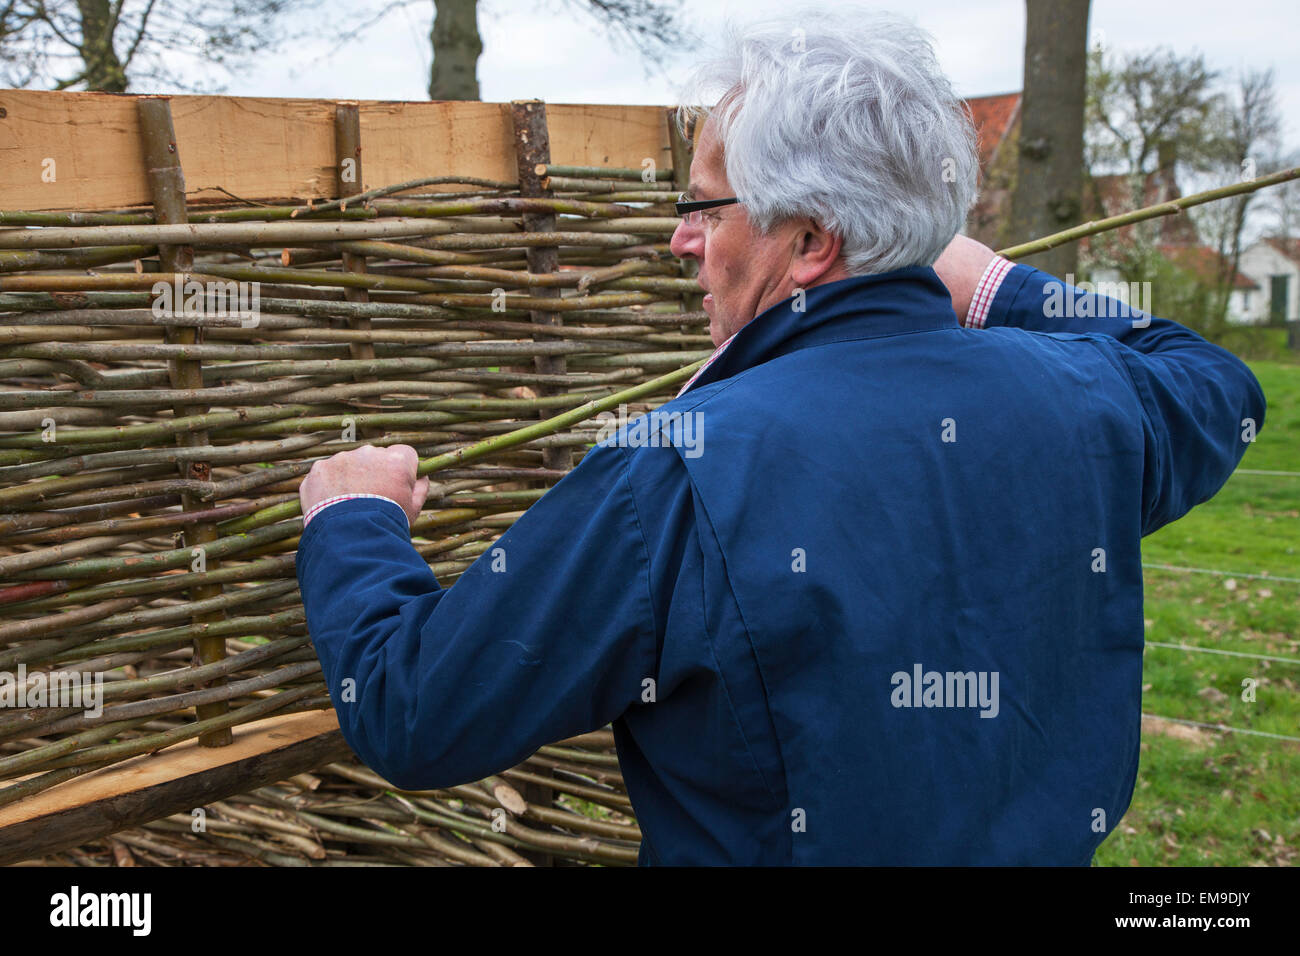 Craftsman making traditional wattle fence by weaving thin willow branches Stock Photo